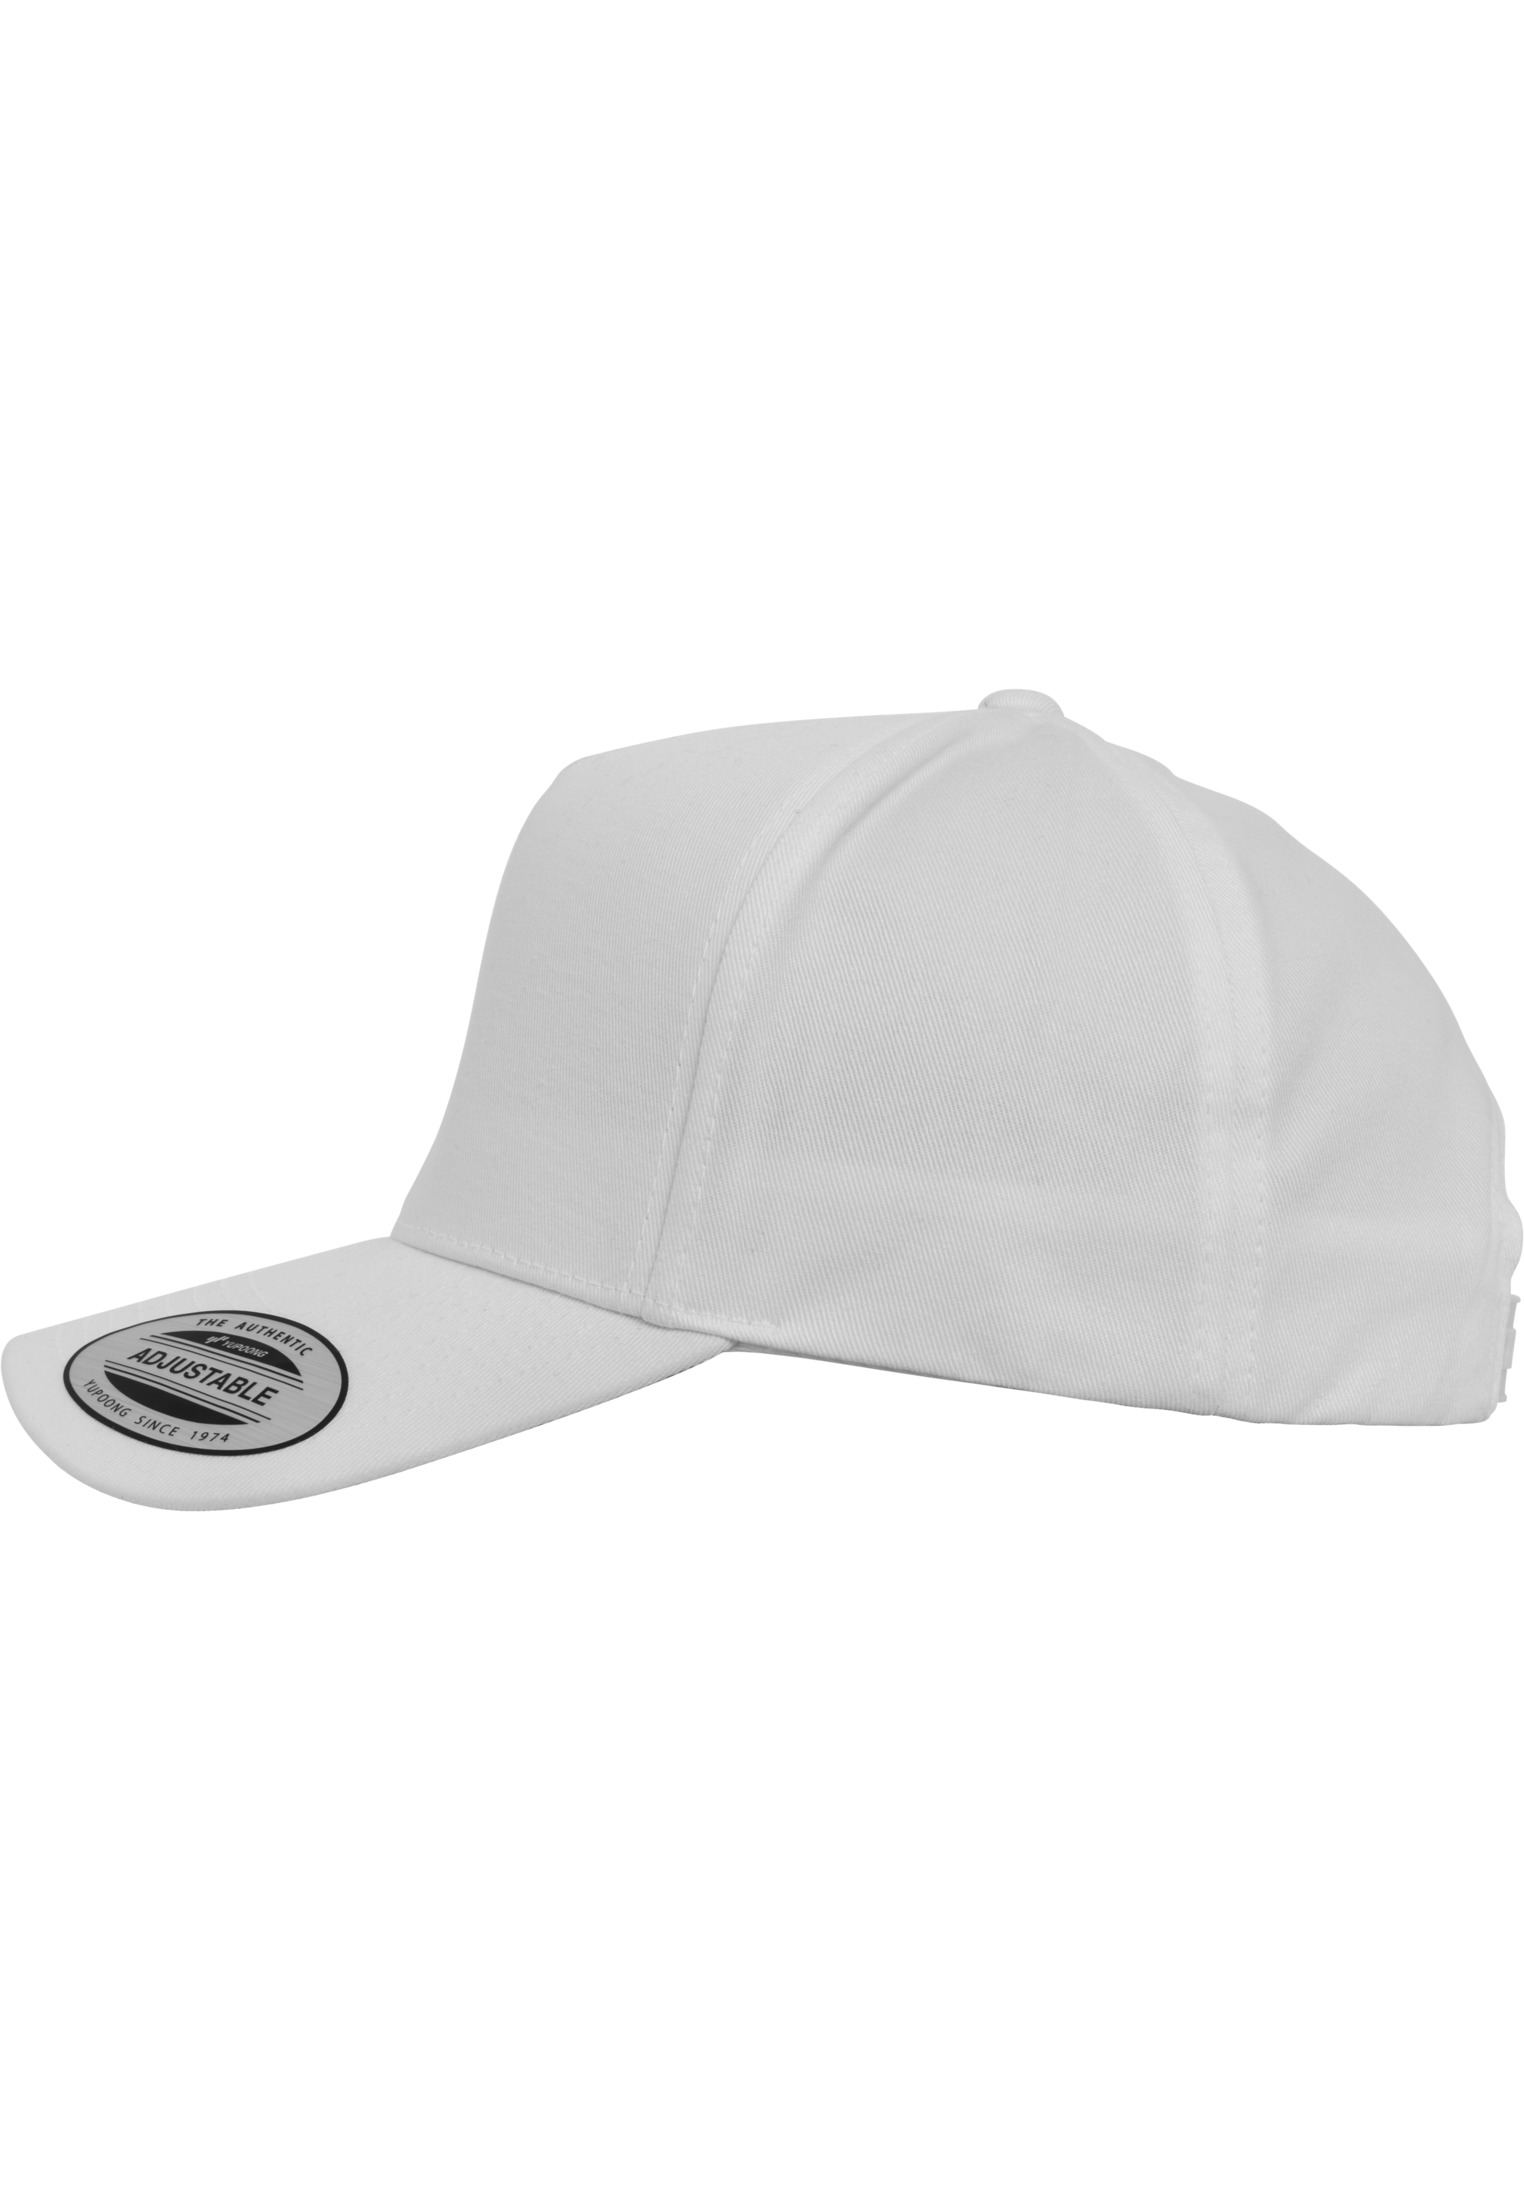 Snapback 5-Panel Curved Classic Snapback in Farbe white